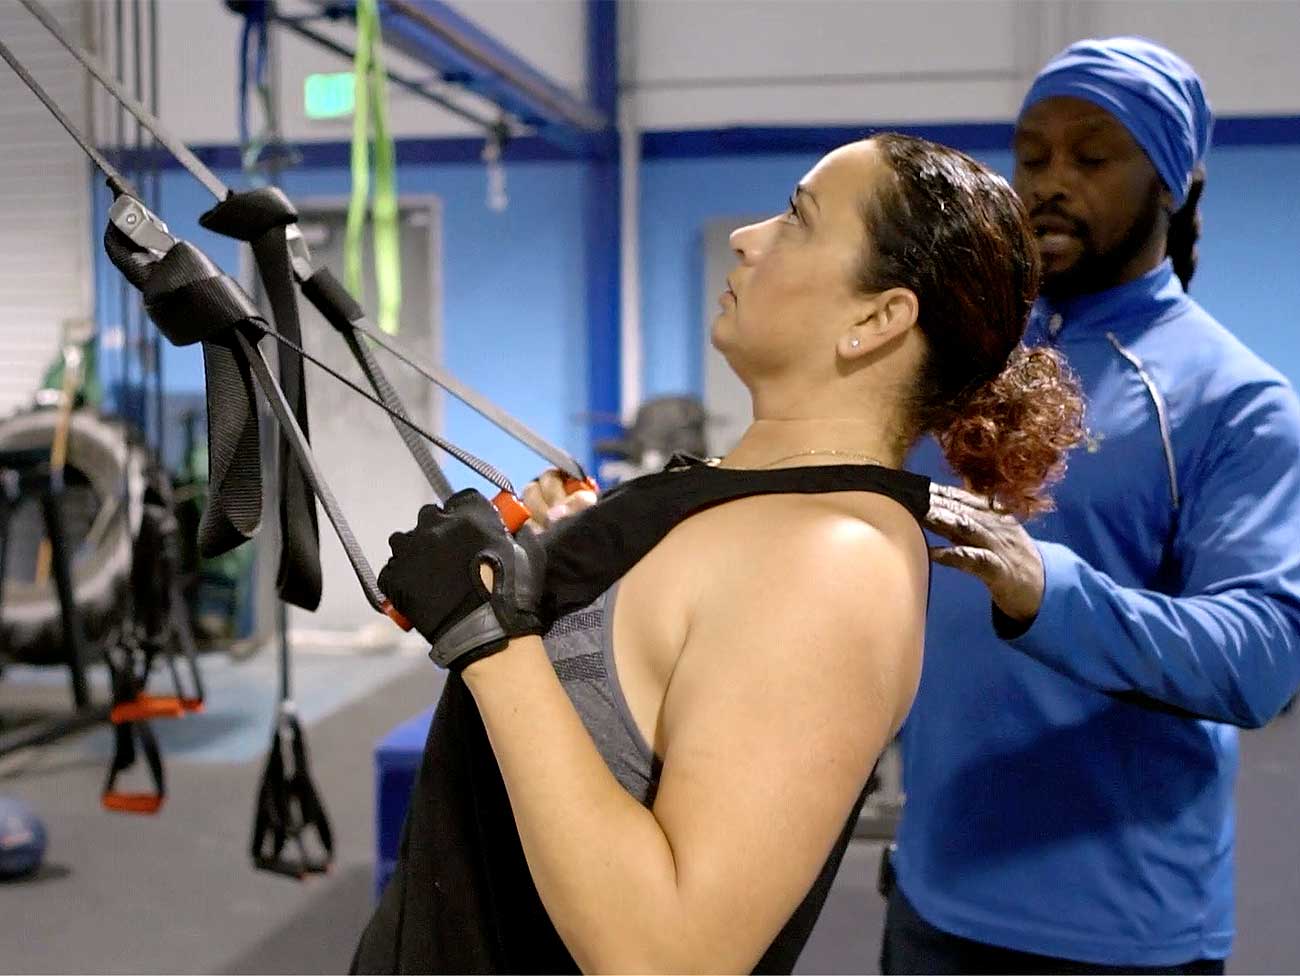 Kaiser Permanente member Michelle Wofford working out at the gym with a personal trainer.